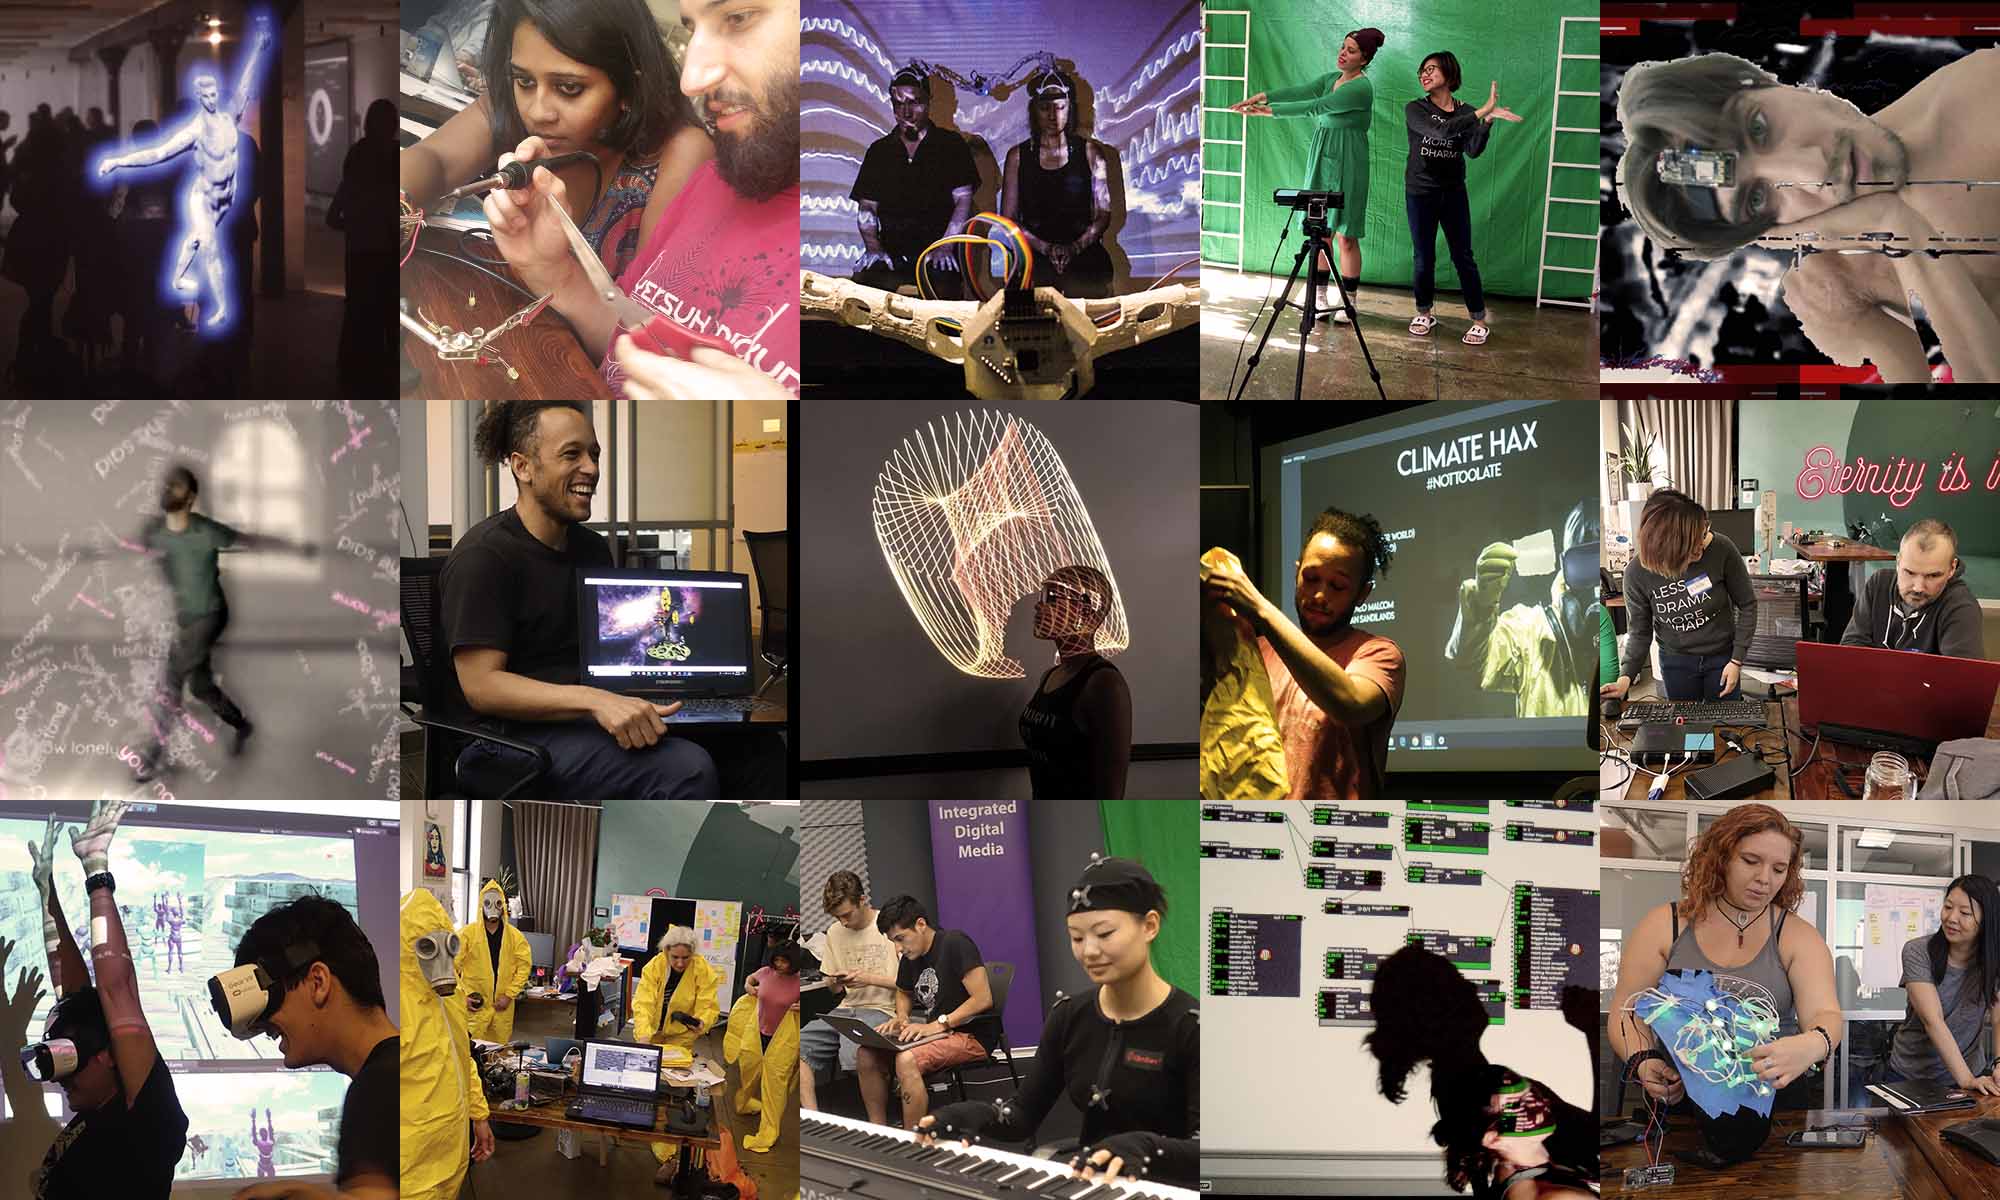 Art-A-Hack supports teams from a variety of disciplines including art, technology, hardware and software development, design, immersive environments, music, theater, animation, social justice and interactivity.